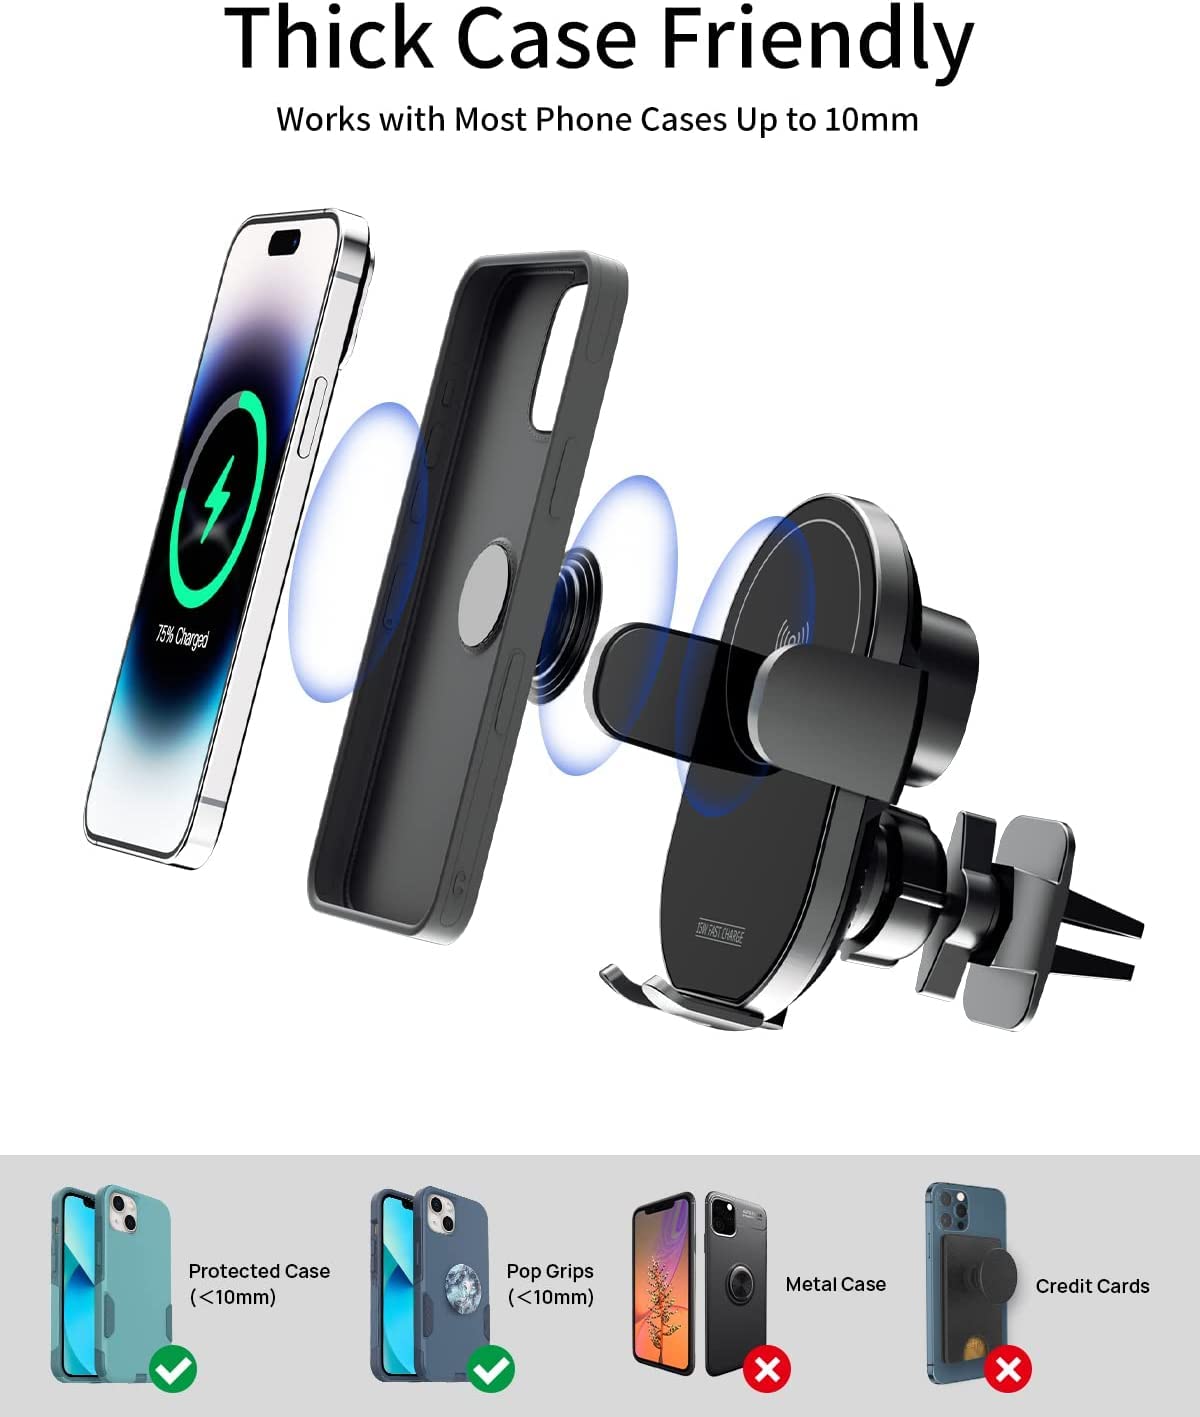 KPON Wireless Charger for Car - Auto Clamping Car Phone Holder Mount Wireless Charging - Dashboard Air Vent Wireless Car Charger Compatible with Popsocket/Otterbox/Thick Cases up to10mm